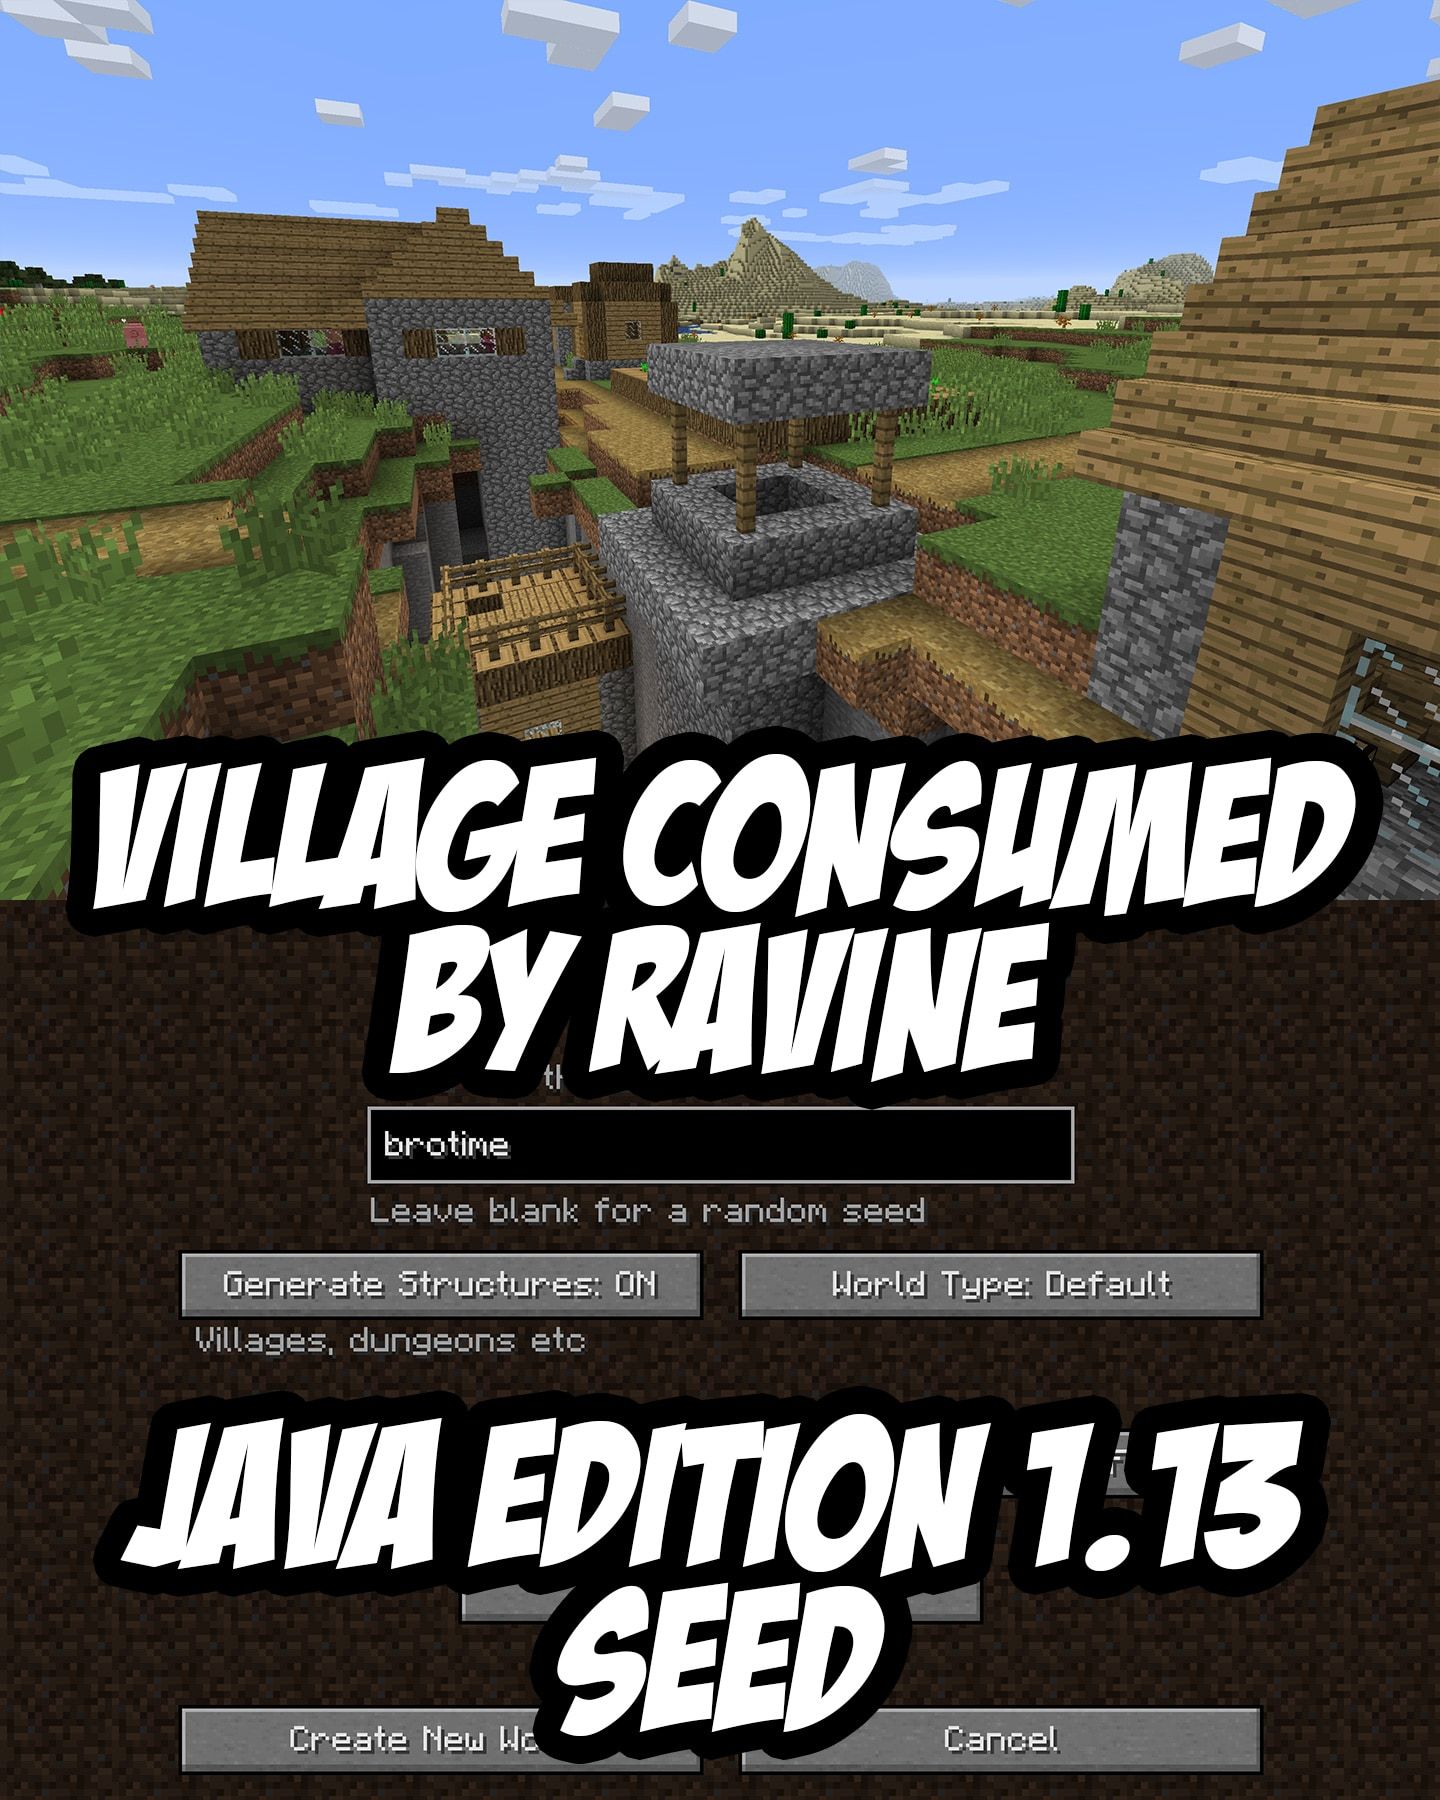 Village Consumed by Ravine (Java) (With images)